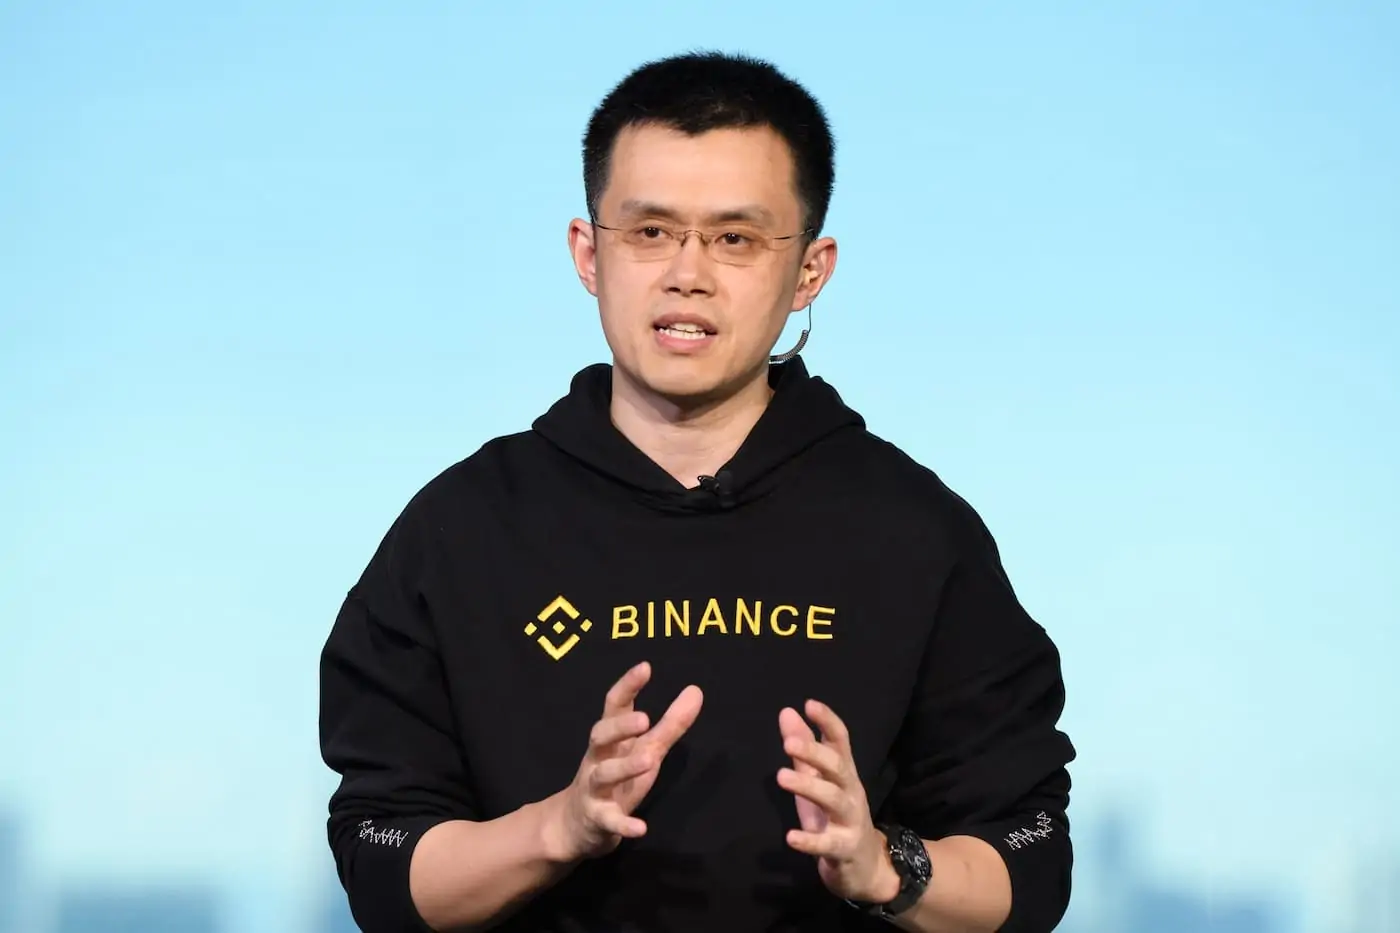 Binance CEO CZ to assist the Terra community, if there is more transparency